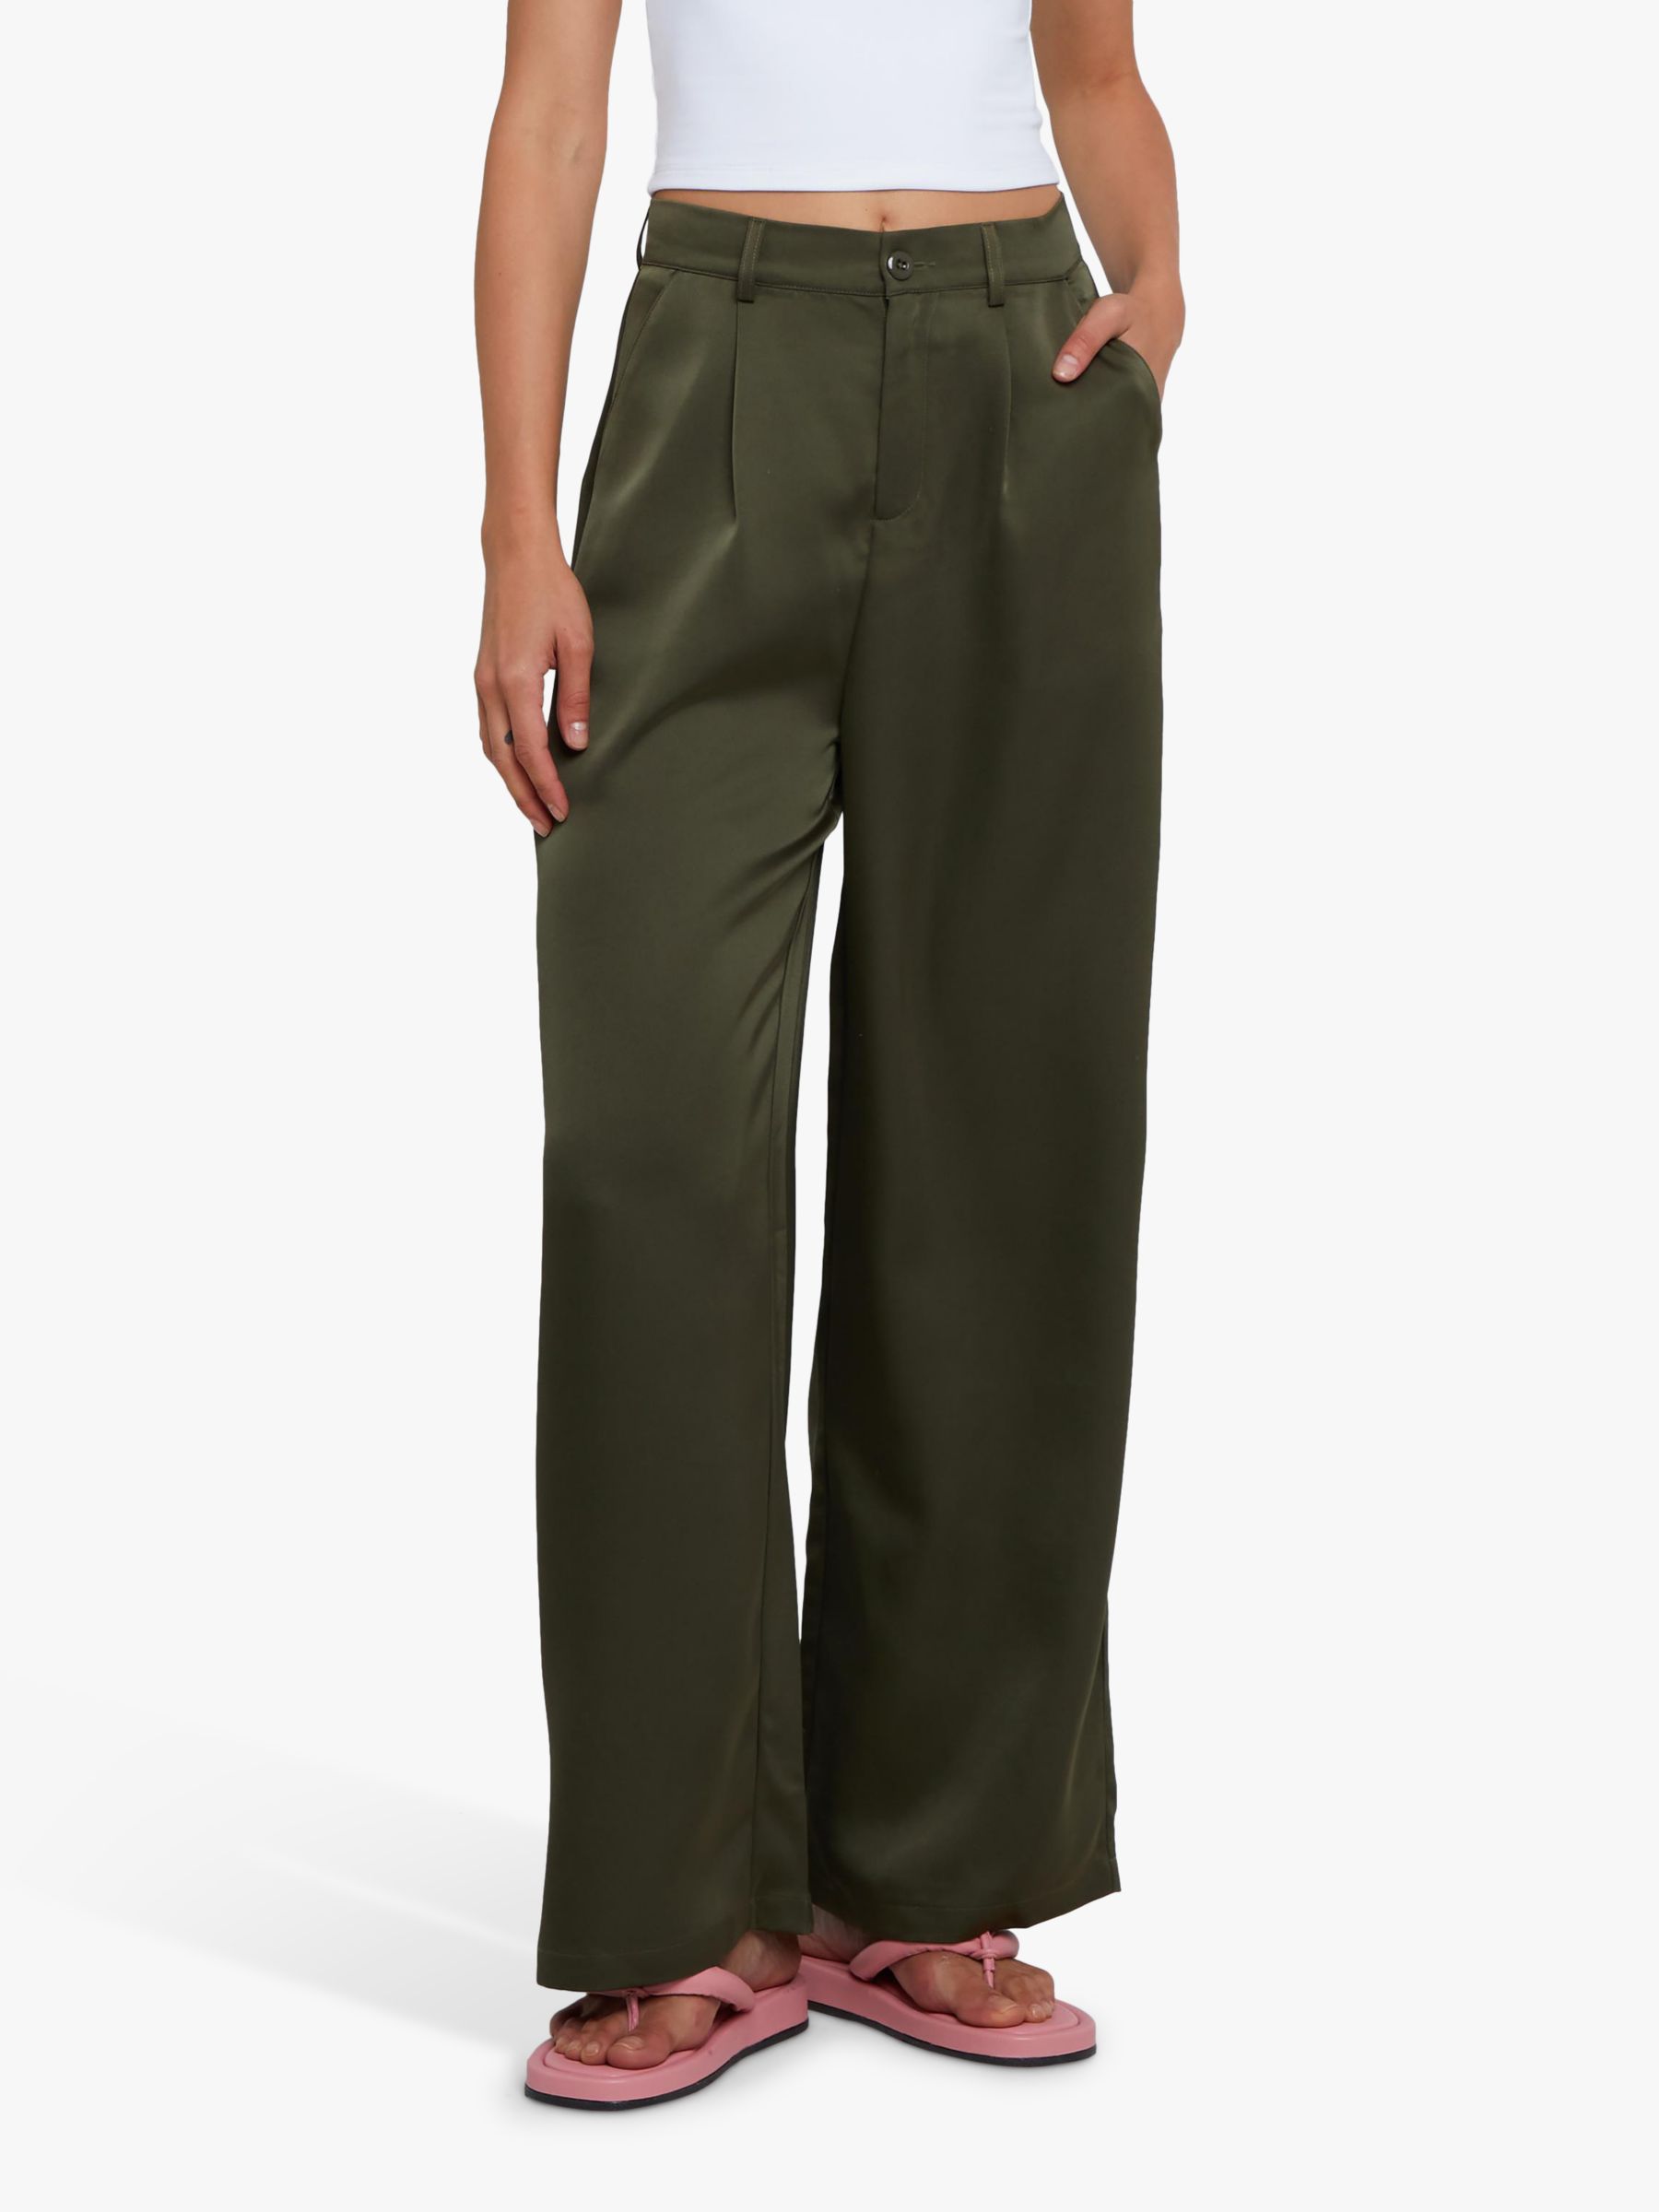 kourt Dixion Relaxed Trousers, Green at John Lewis & Partners